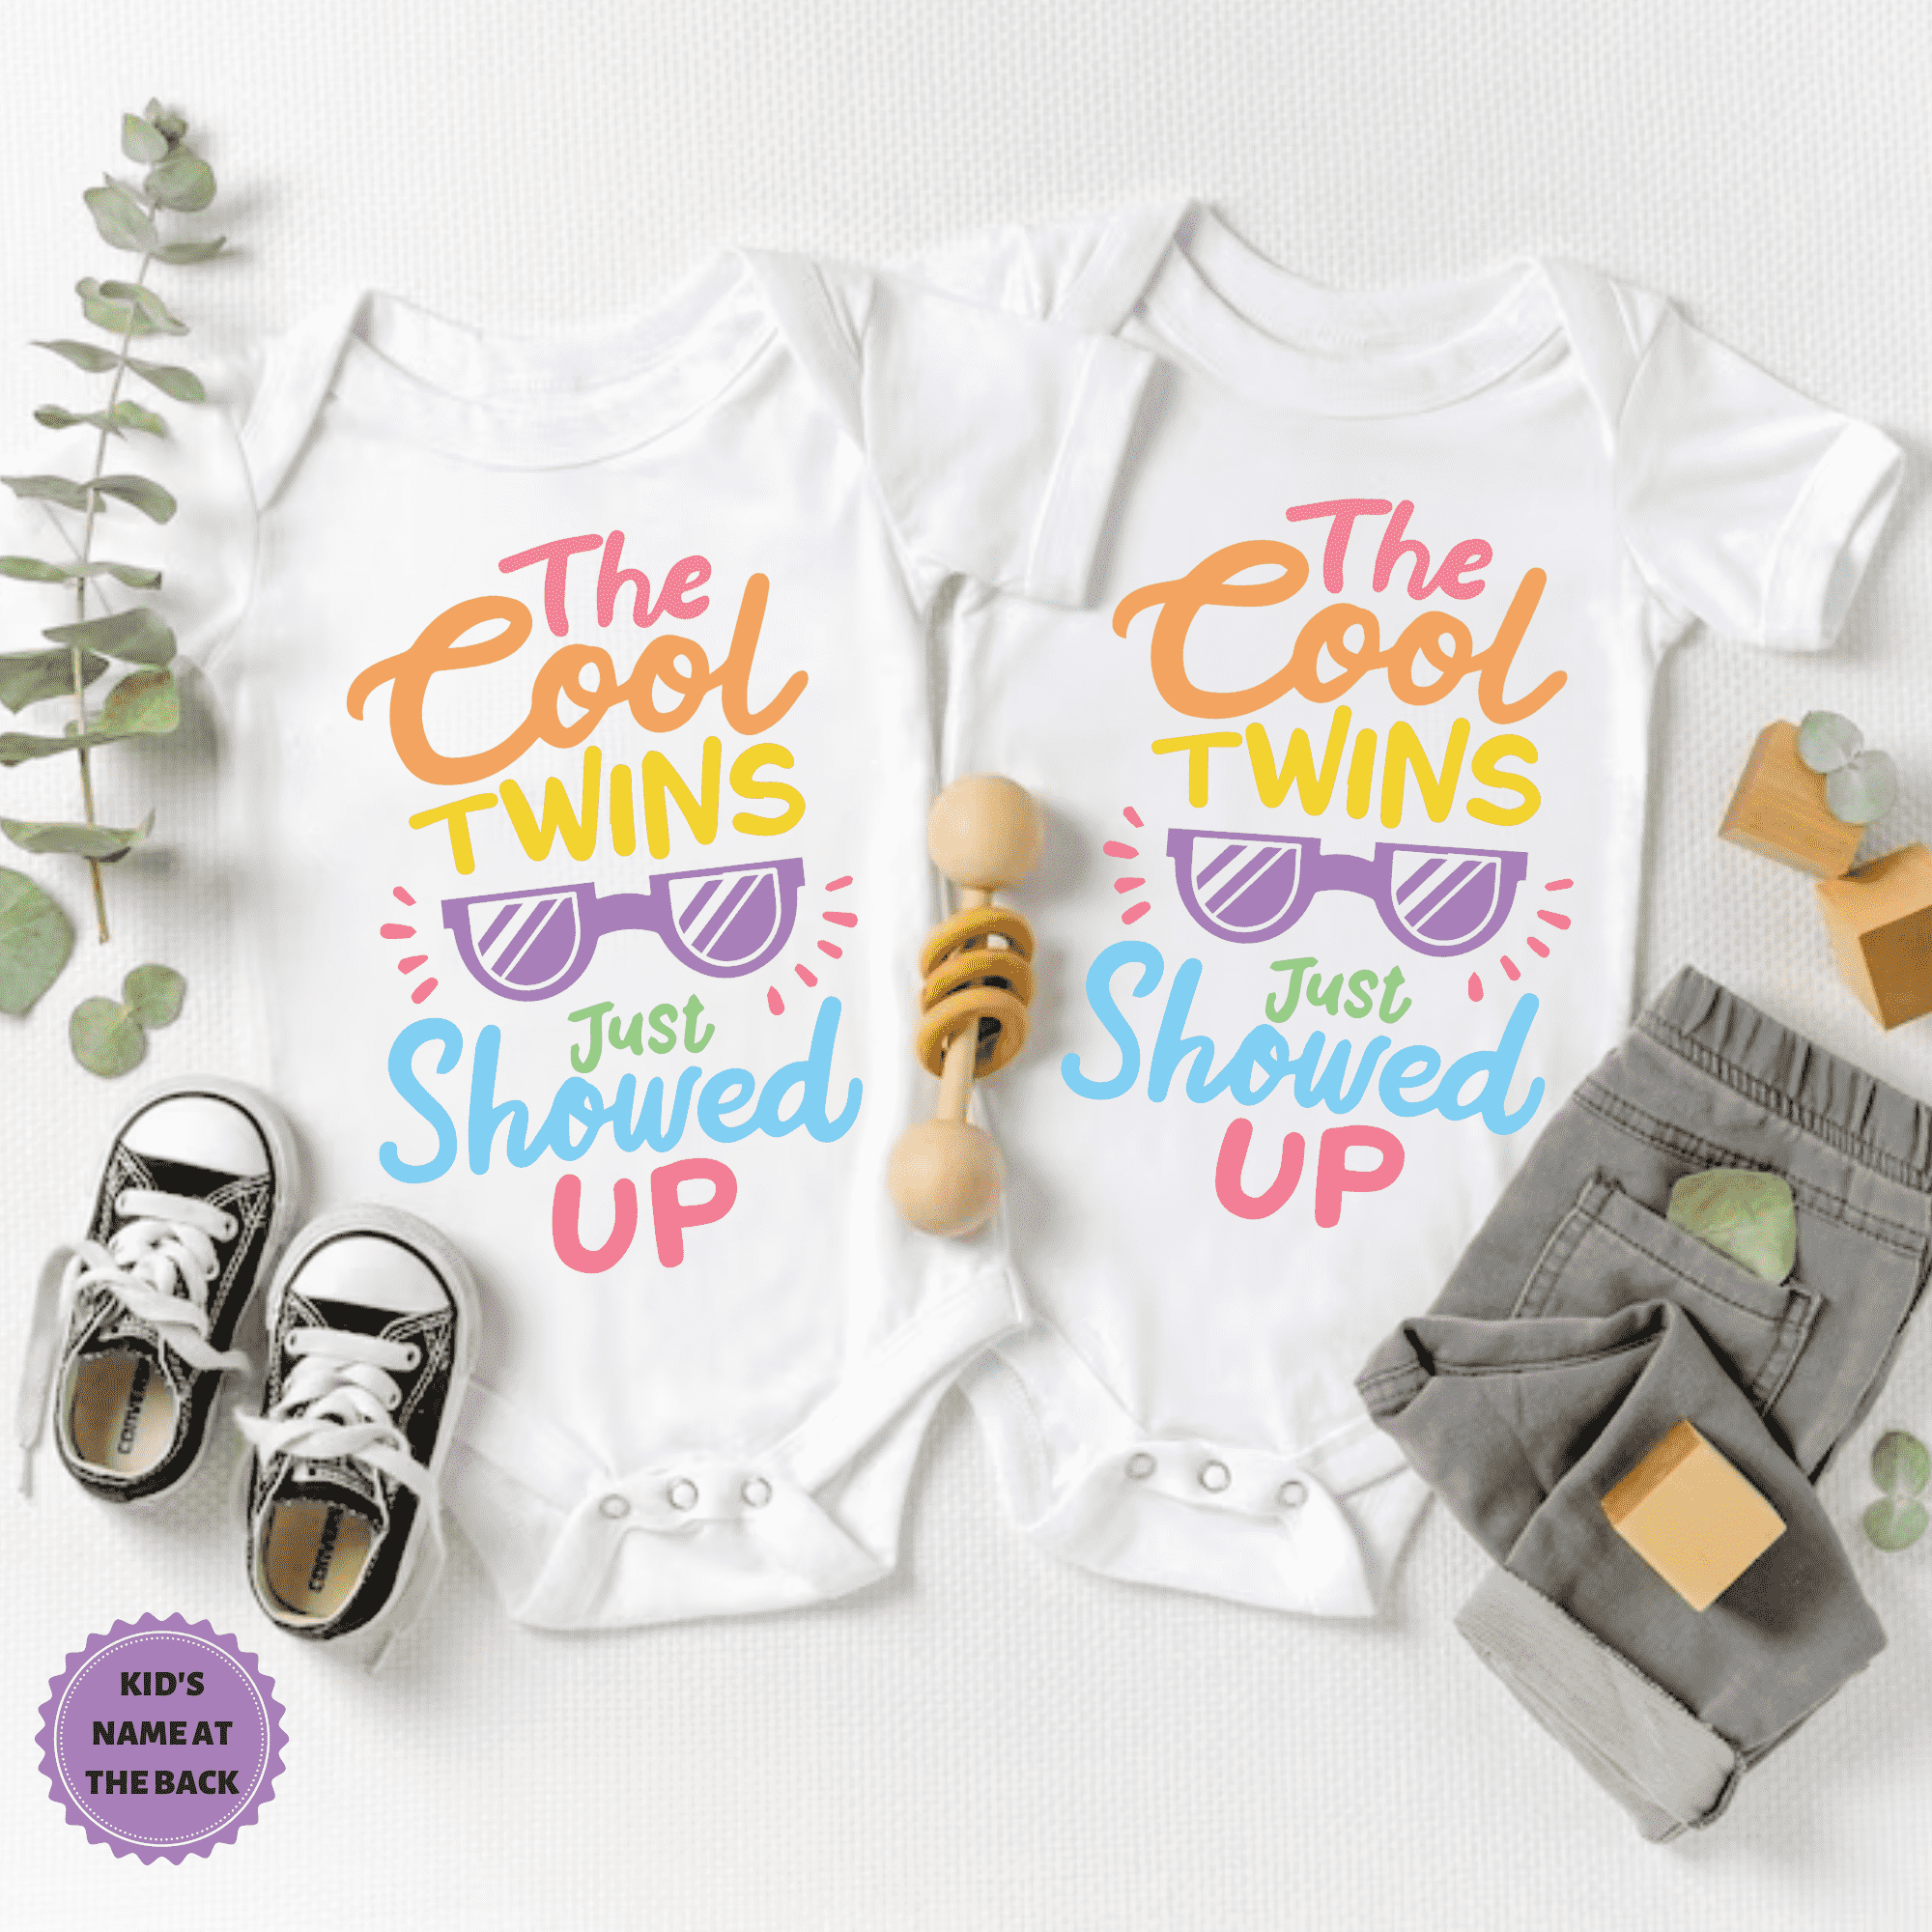 Adorable and Practical Baby Gifts for Twin Boys and Girls